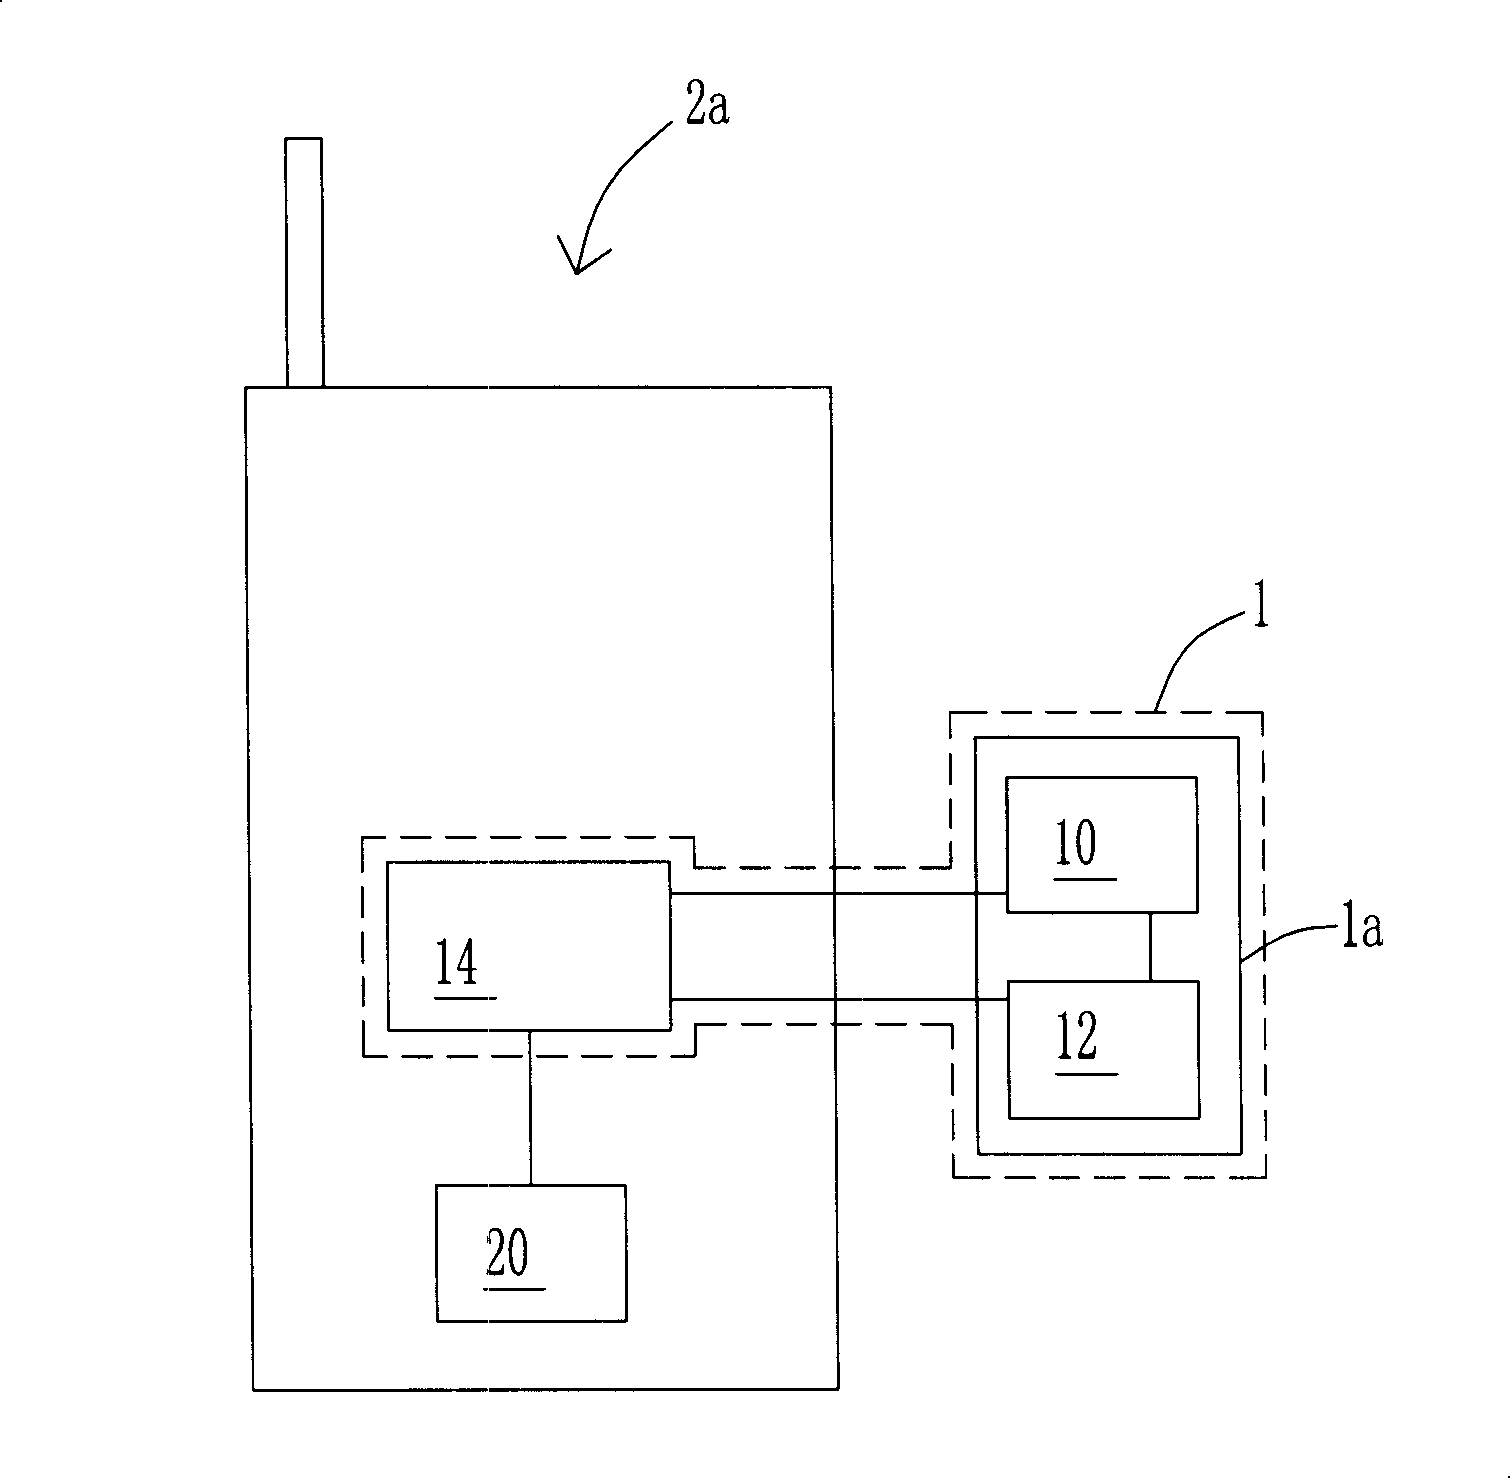 Electronic purse system and method